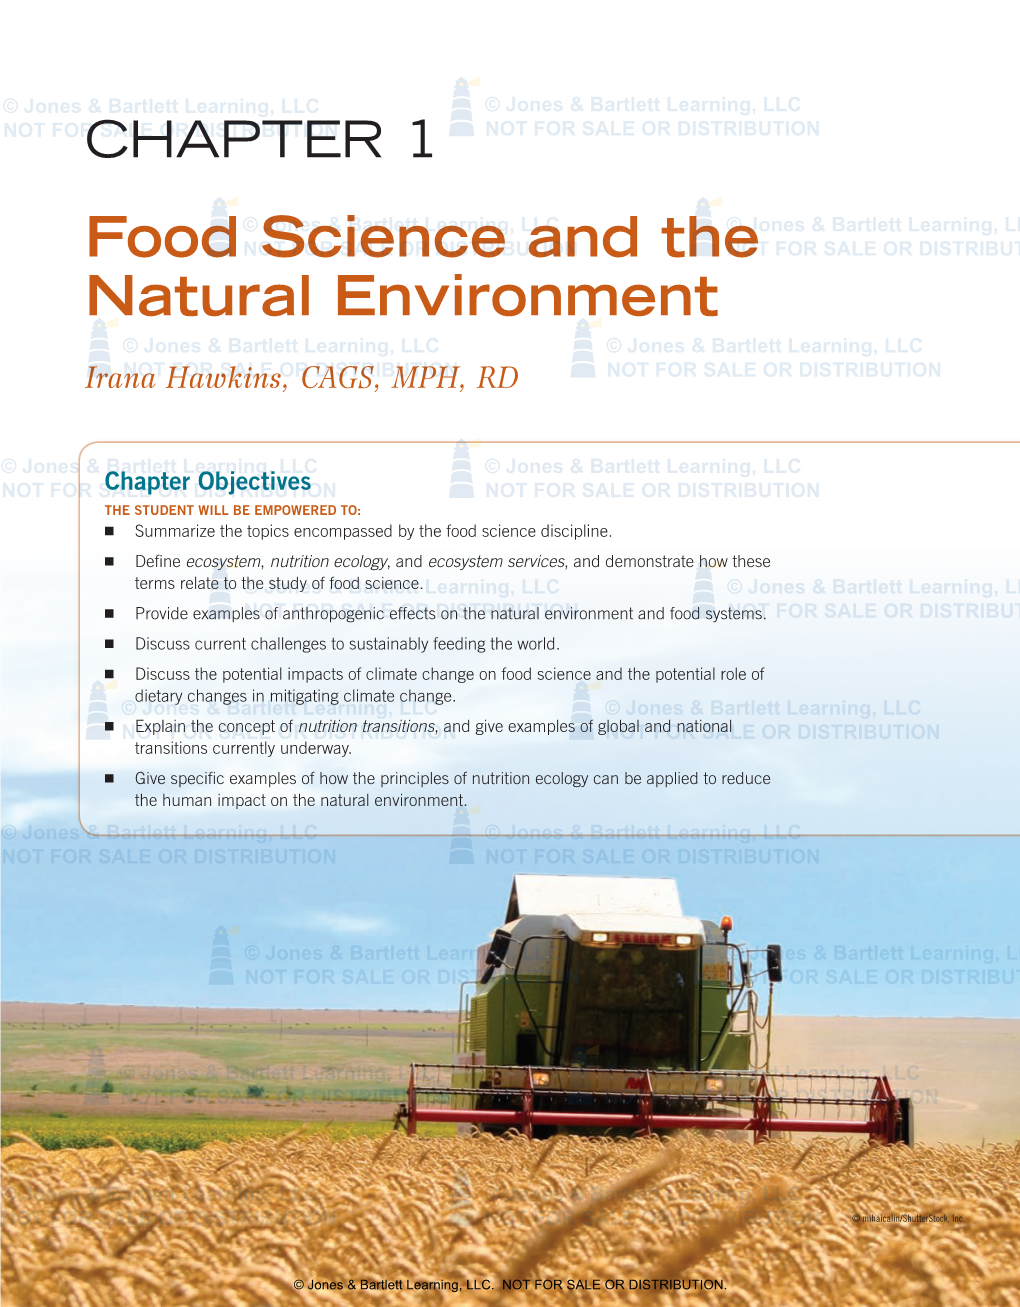 Food Science and the Natural Environment